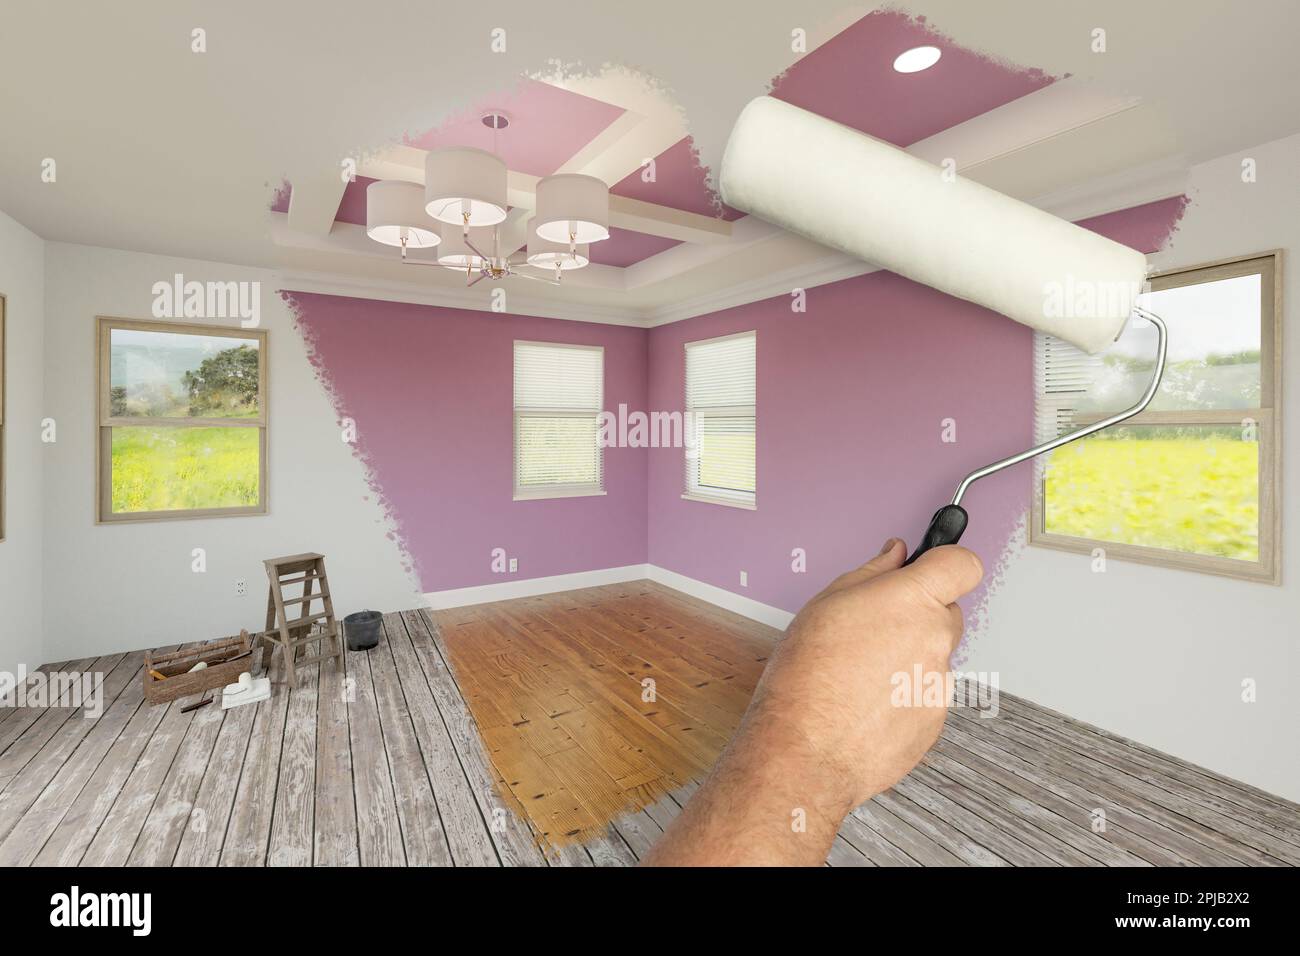 Before and After of Man Using A Paint Roller to Reveal Newly Remodeled Room with Fresh Lilac Paint, Coffered Ceiling and New Floors. Stock Photo